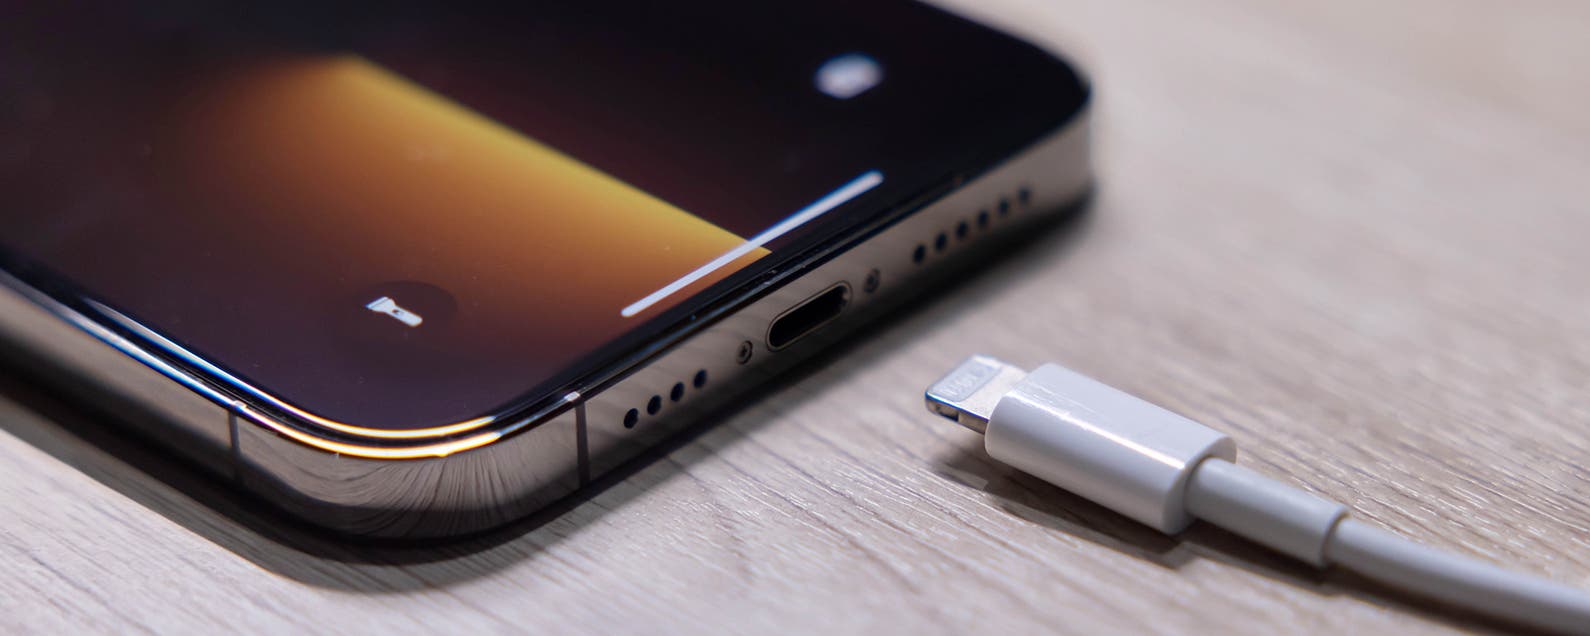 lightning connector on iphone